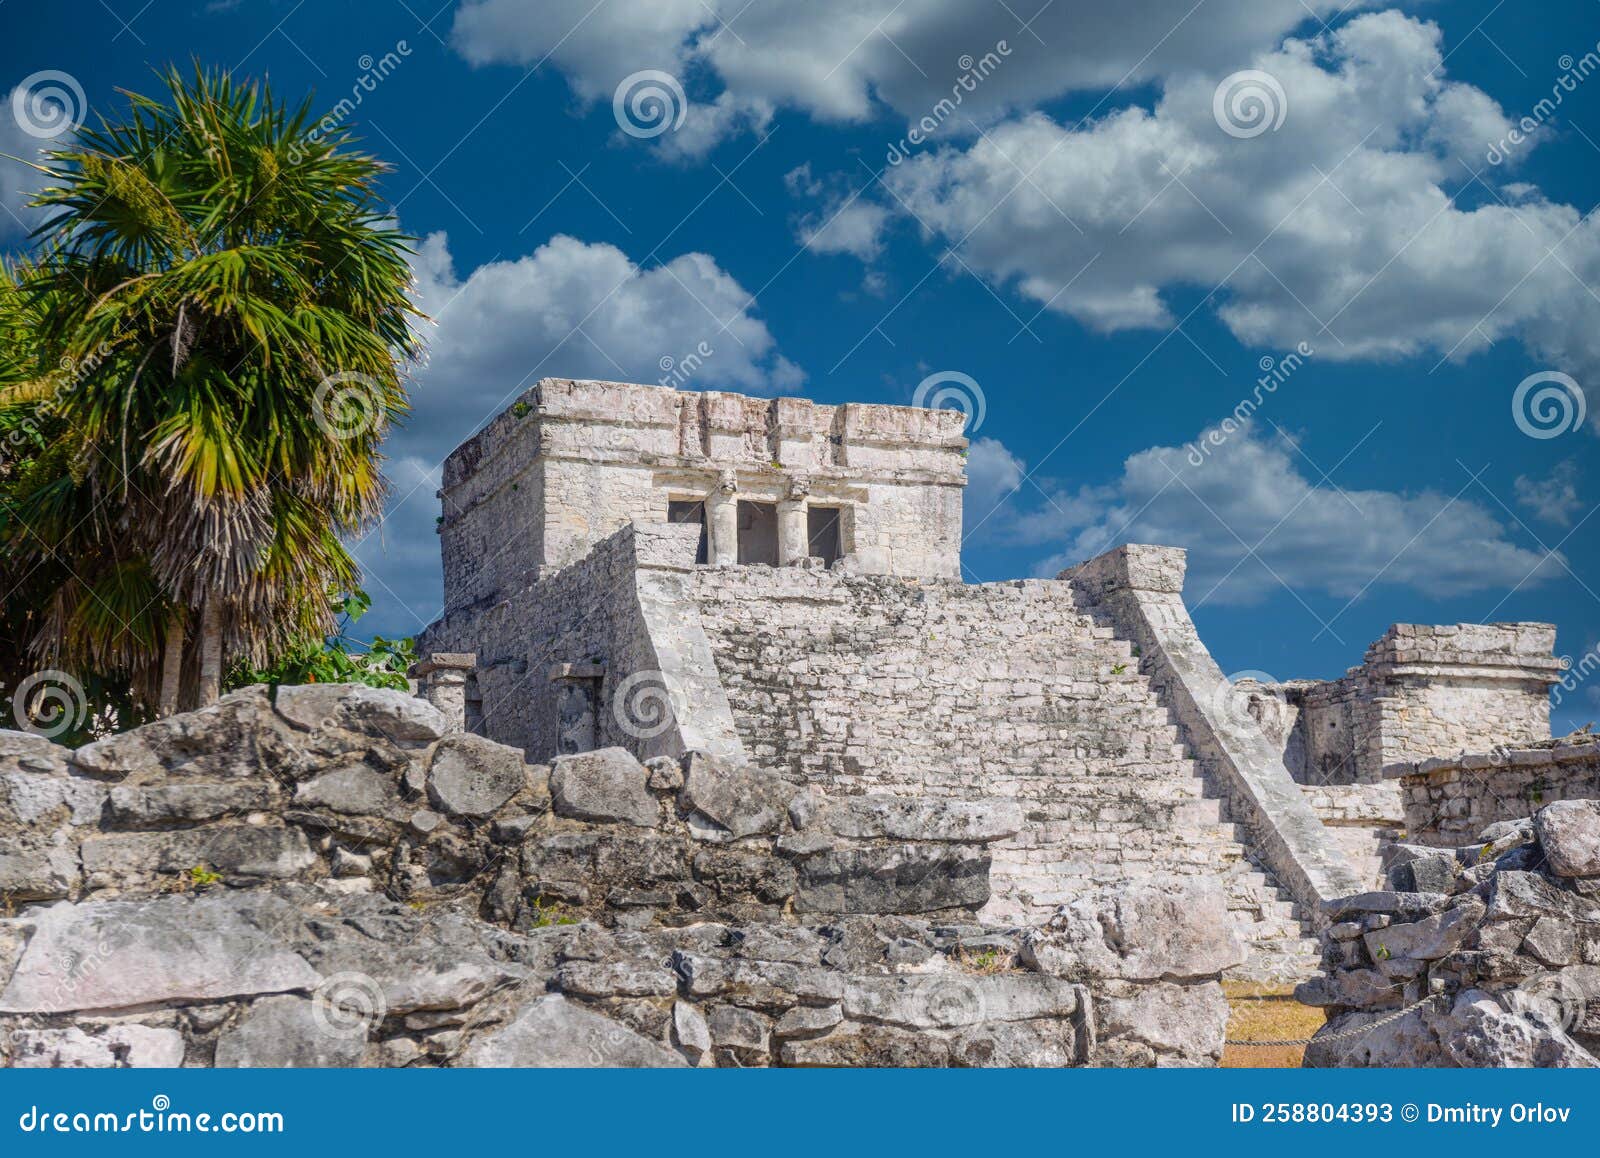 castle on the coast of mexico